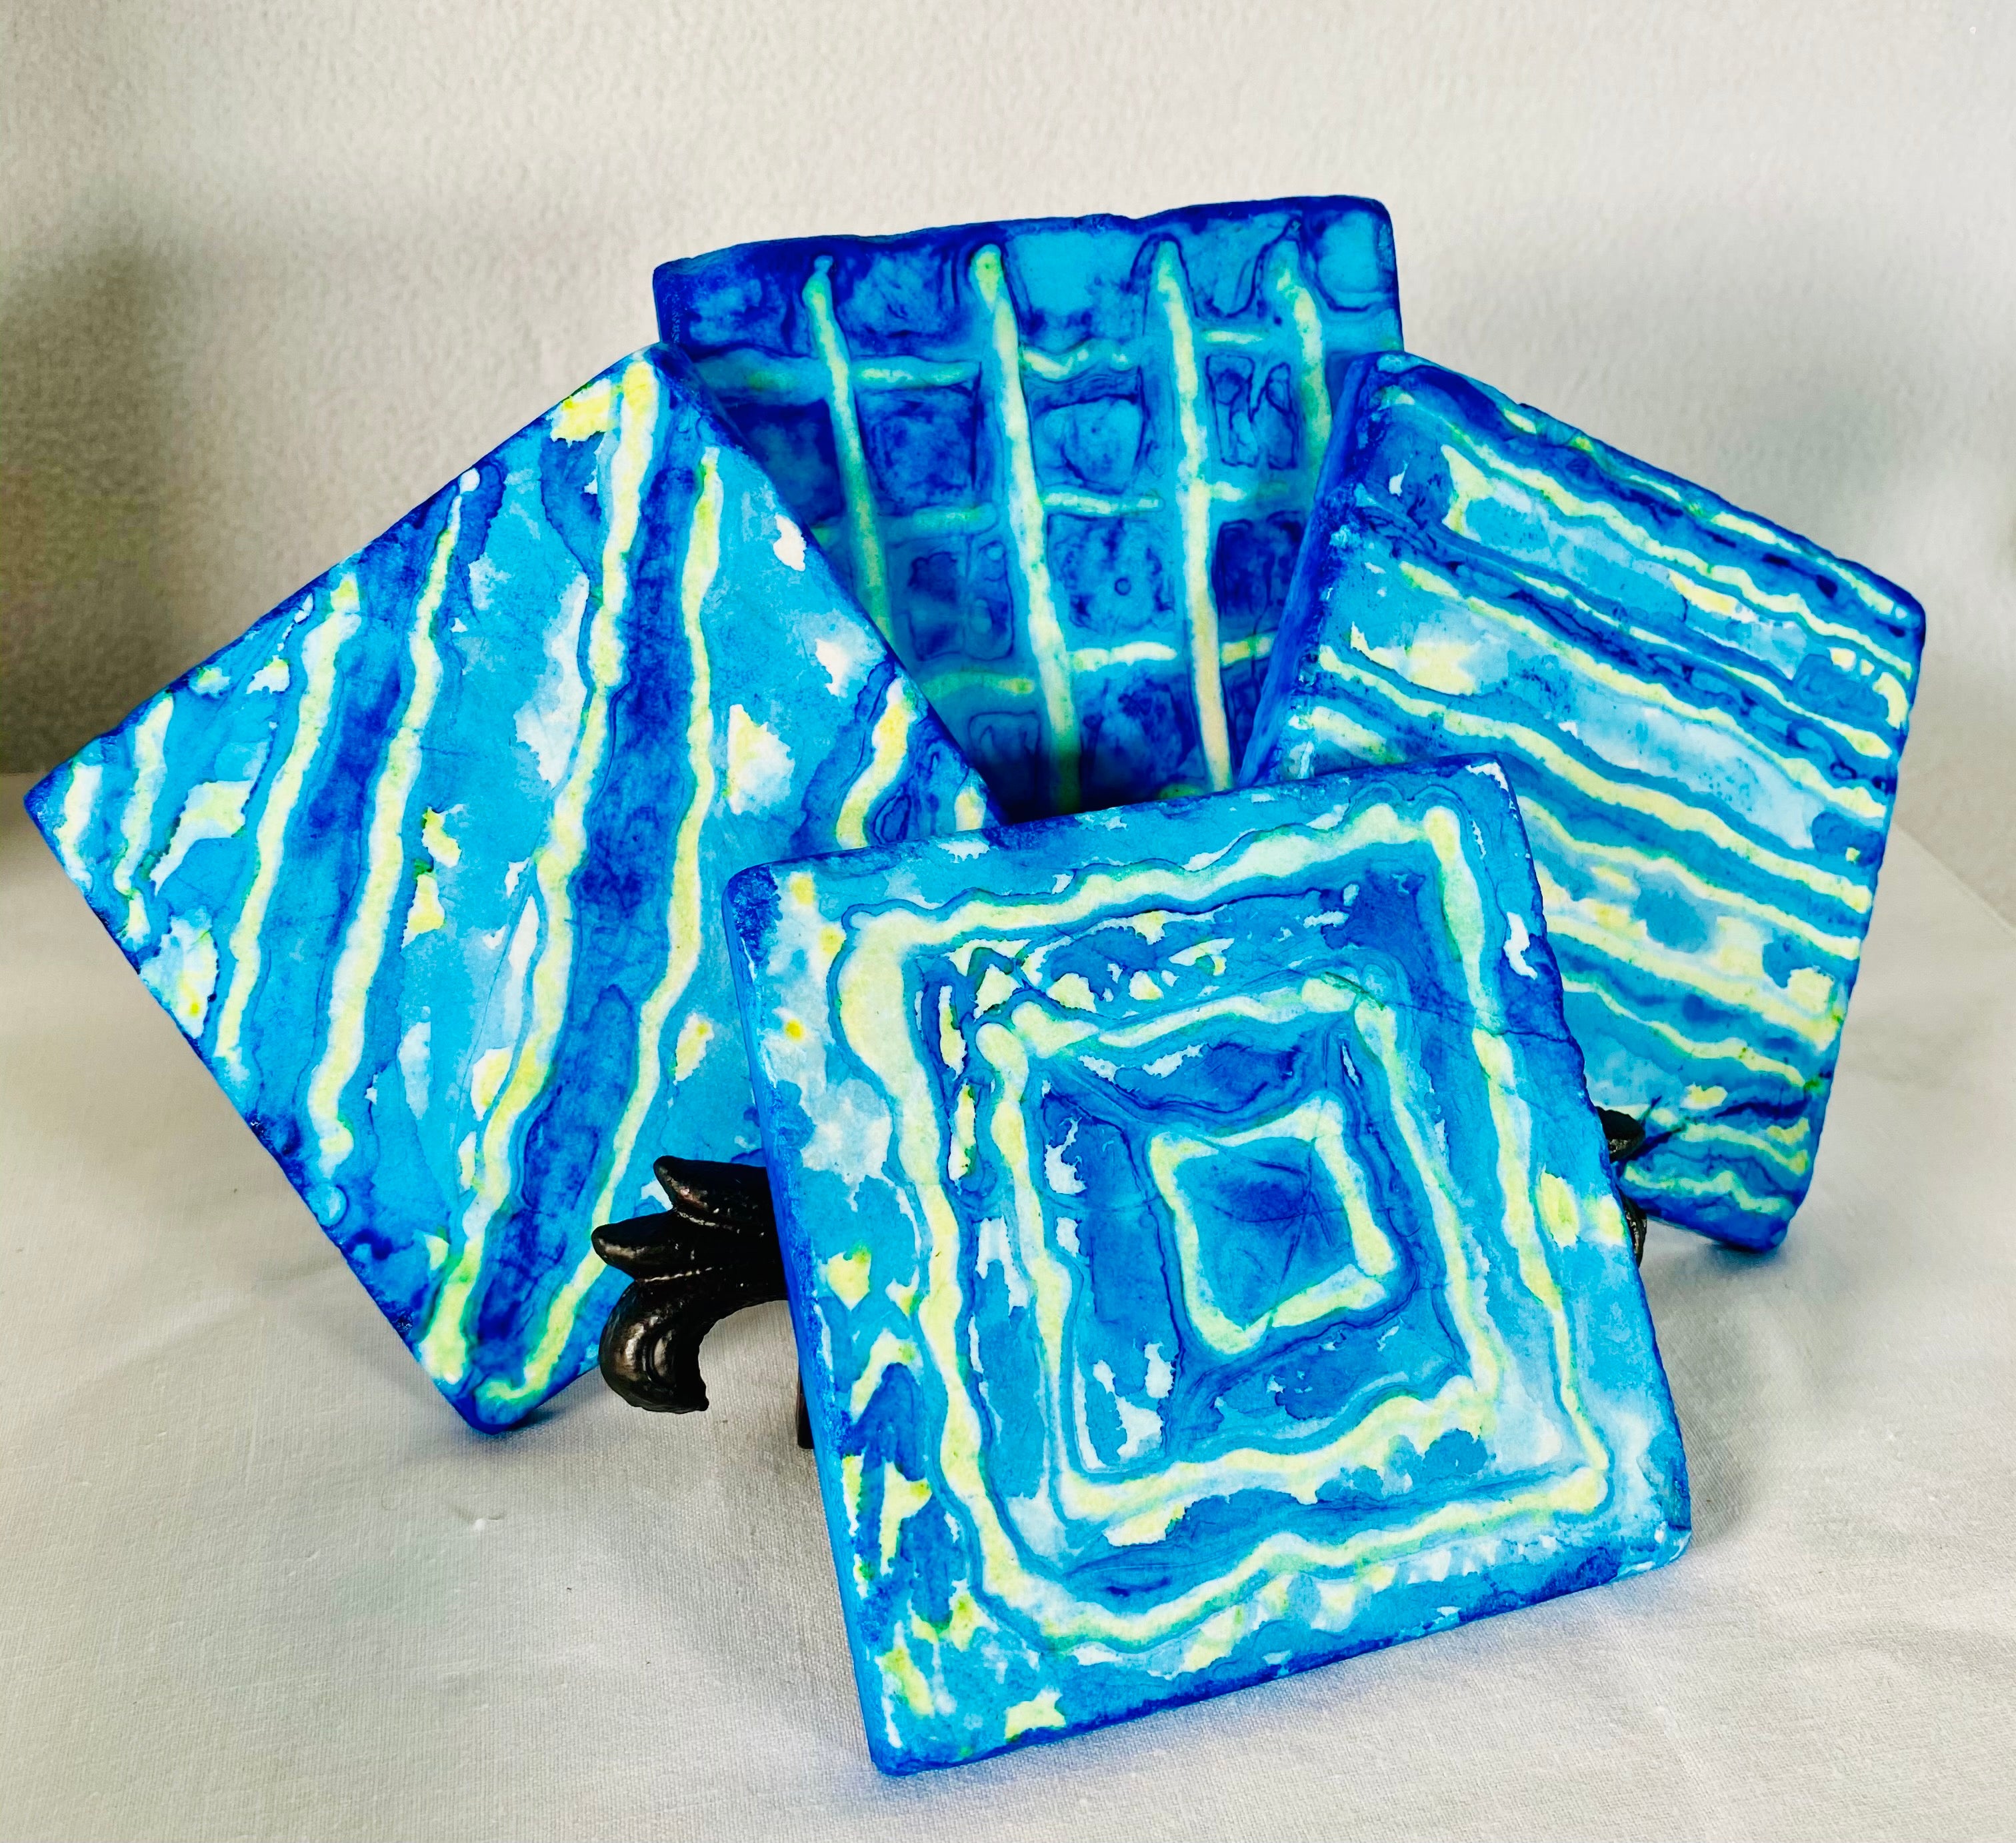 Blue Yellow Stone Coaster Set product image features a set of four stone coaters. Hand painted. Finished to last. Signed. Cork backed. Botticino marble tiles. Blue and yellow design. Wipe with damp cloth. Measures 4" X 4". Gift wrapped for Father's Day.